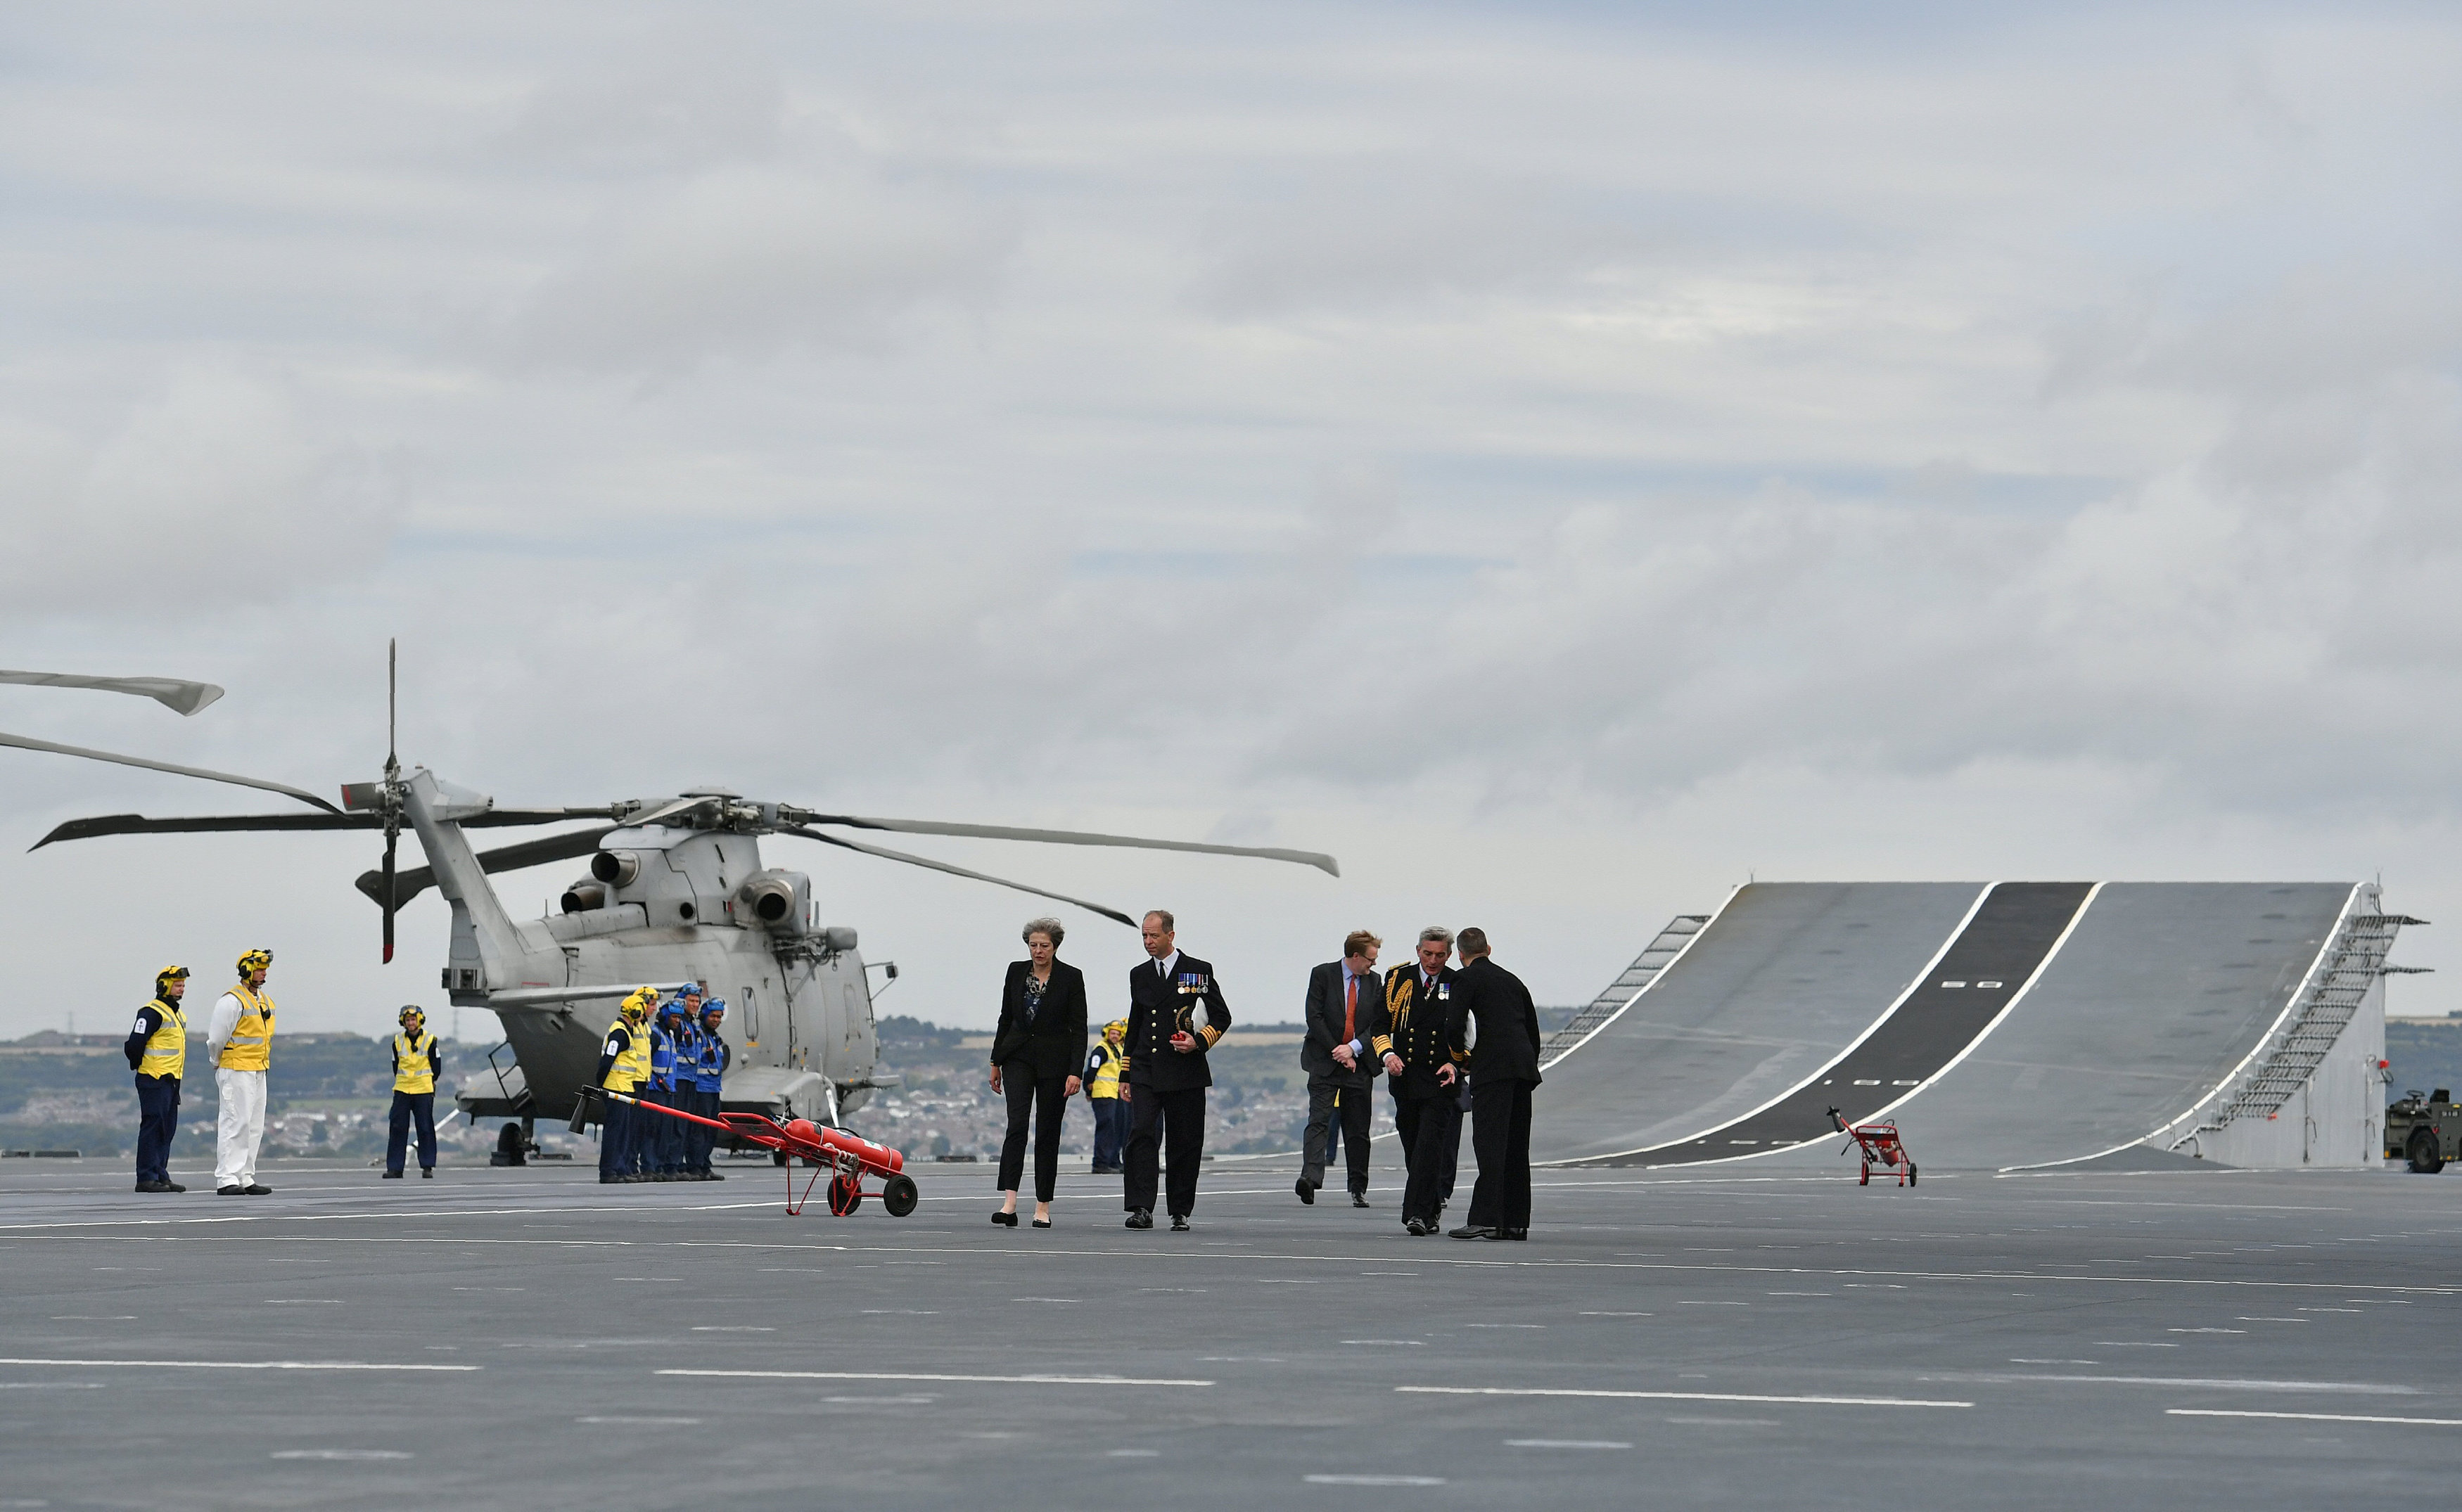 In pictures: Britain Royal Navy's new aircraft carrier HMS Queen Elizabeth